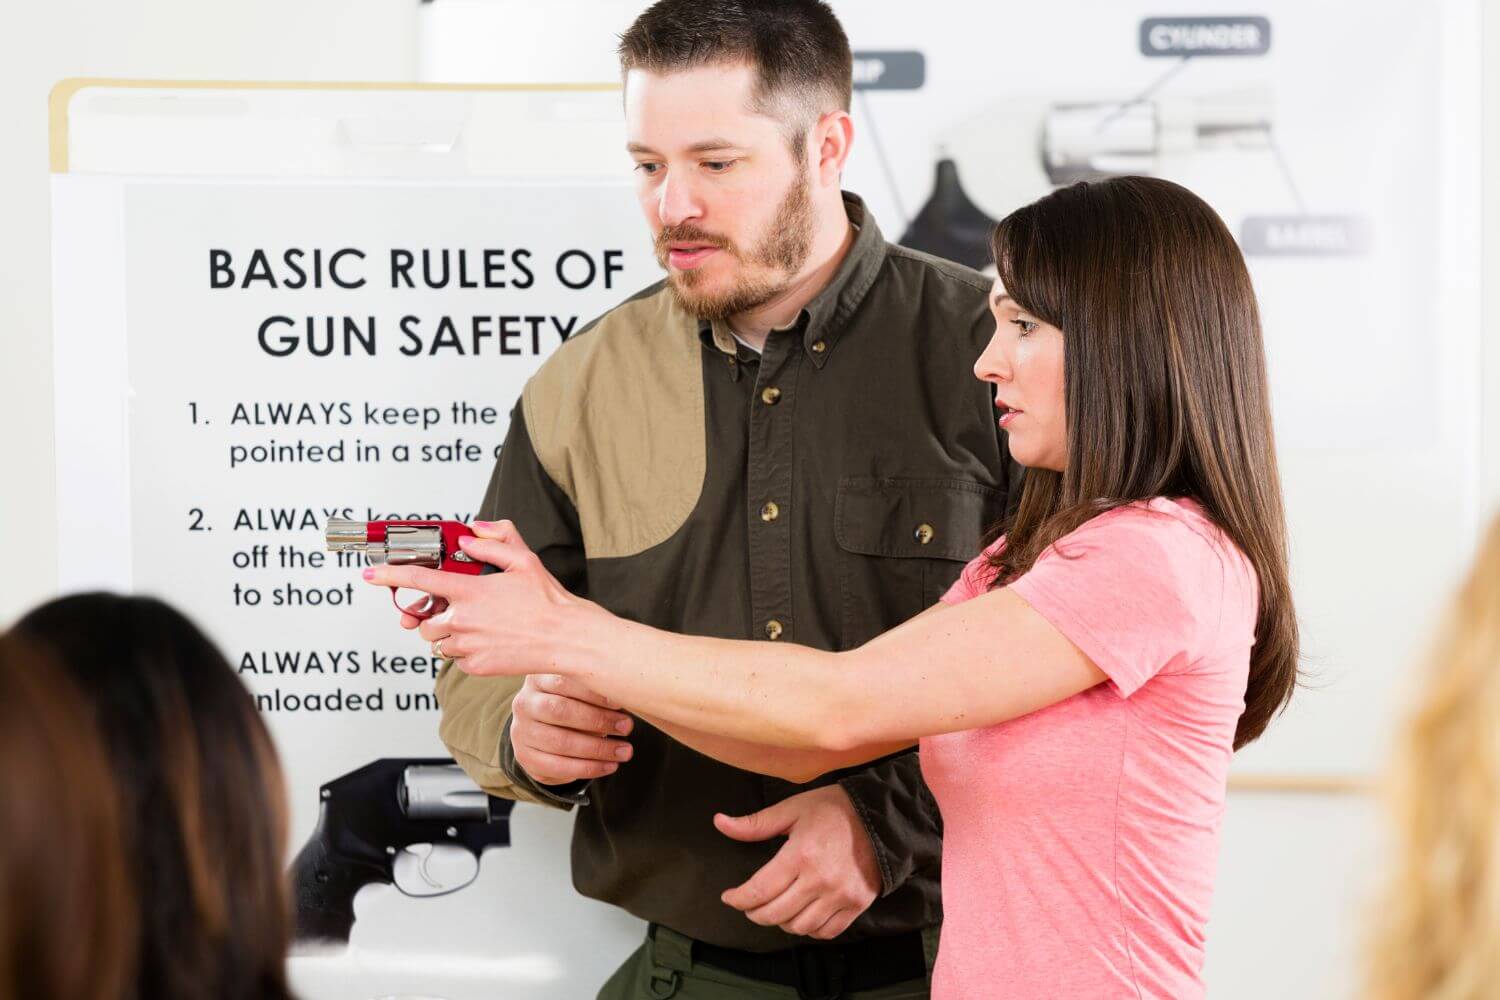 Woman learning how to aim a firearm at a gun safety class